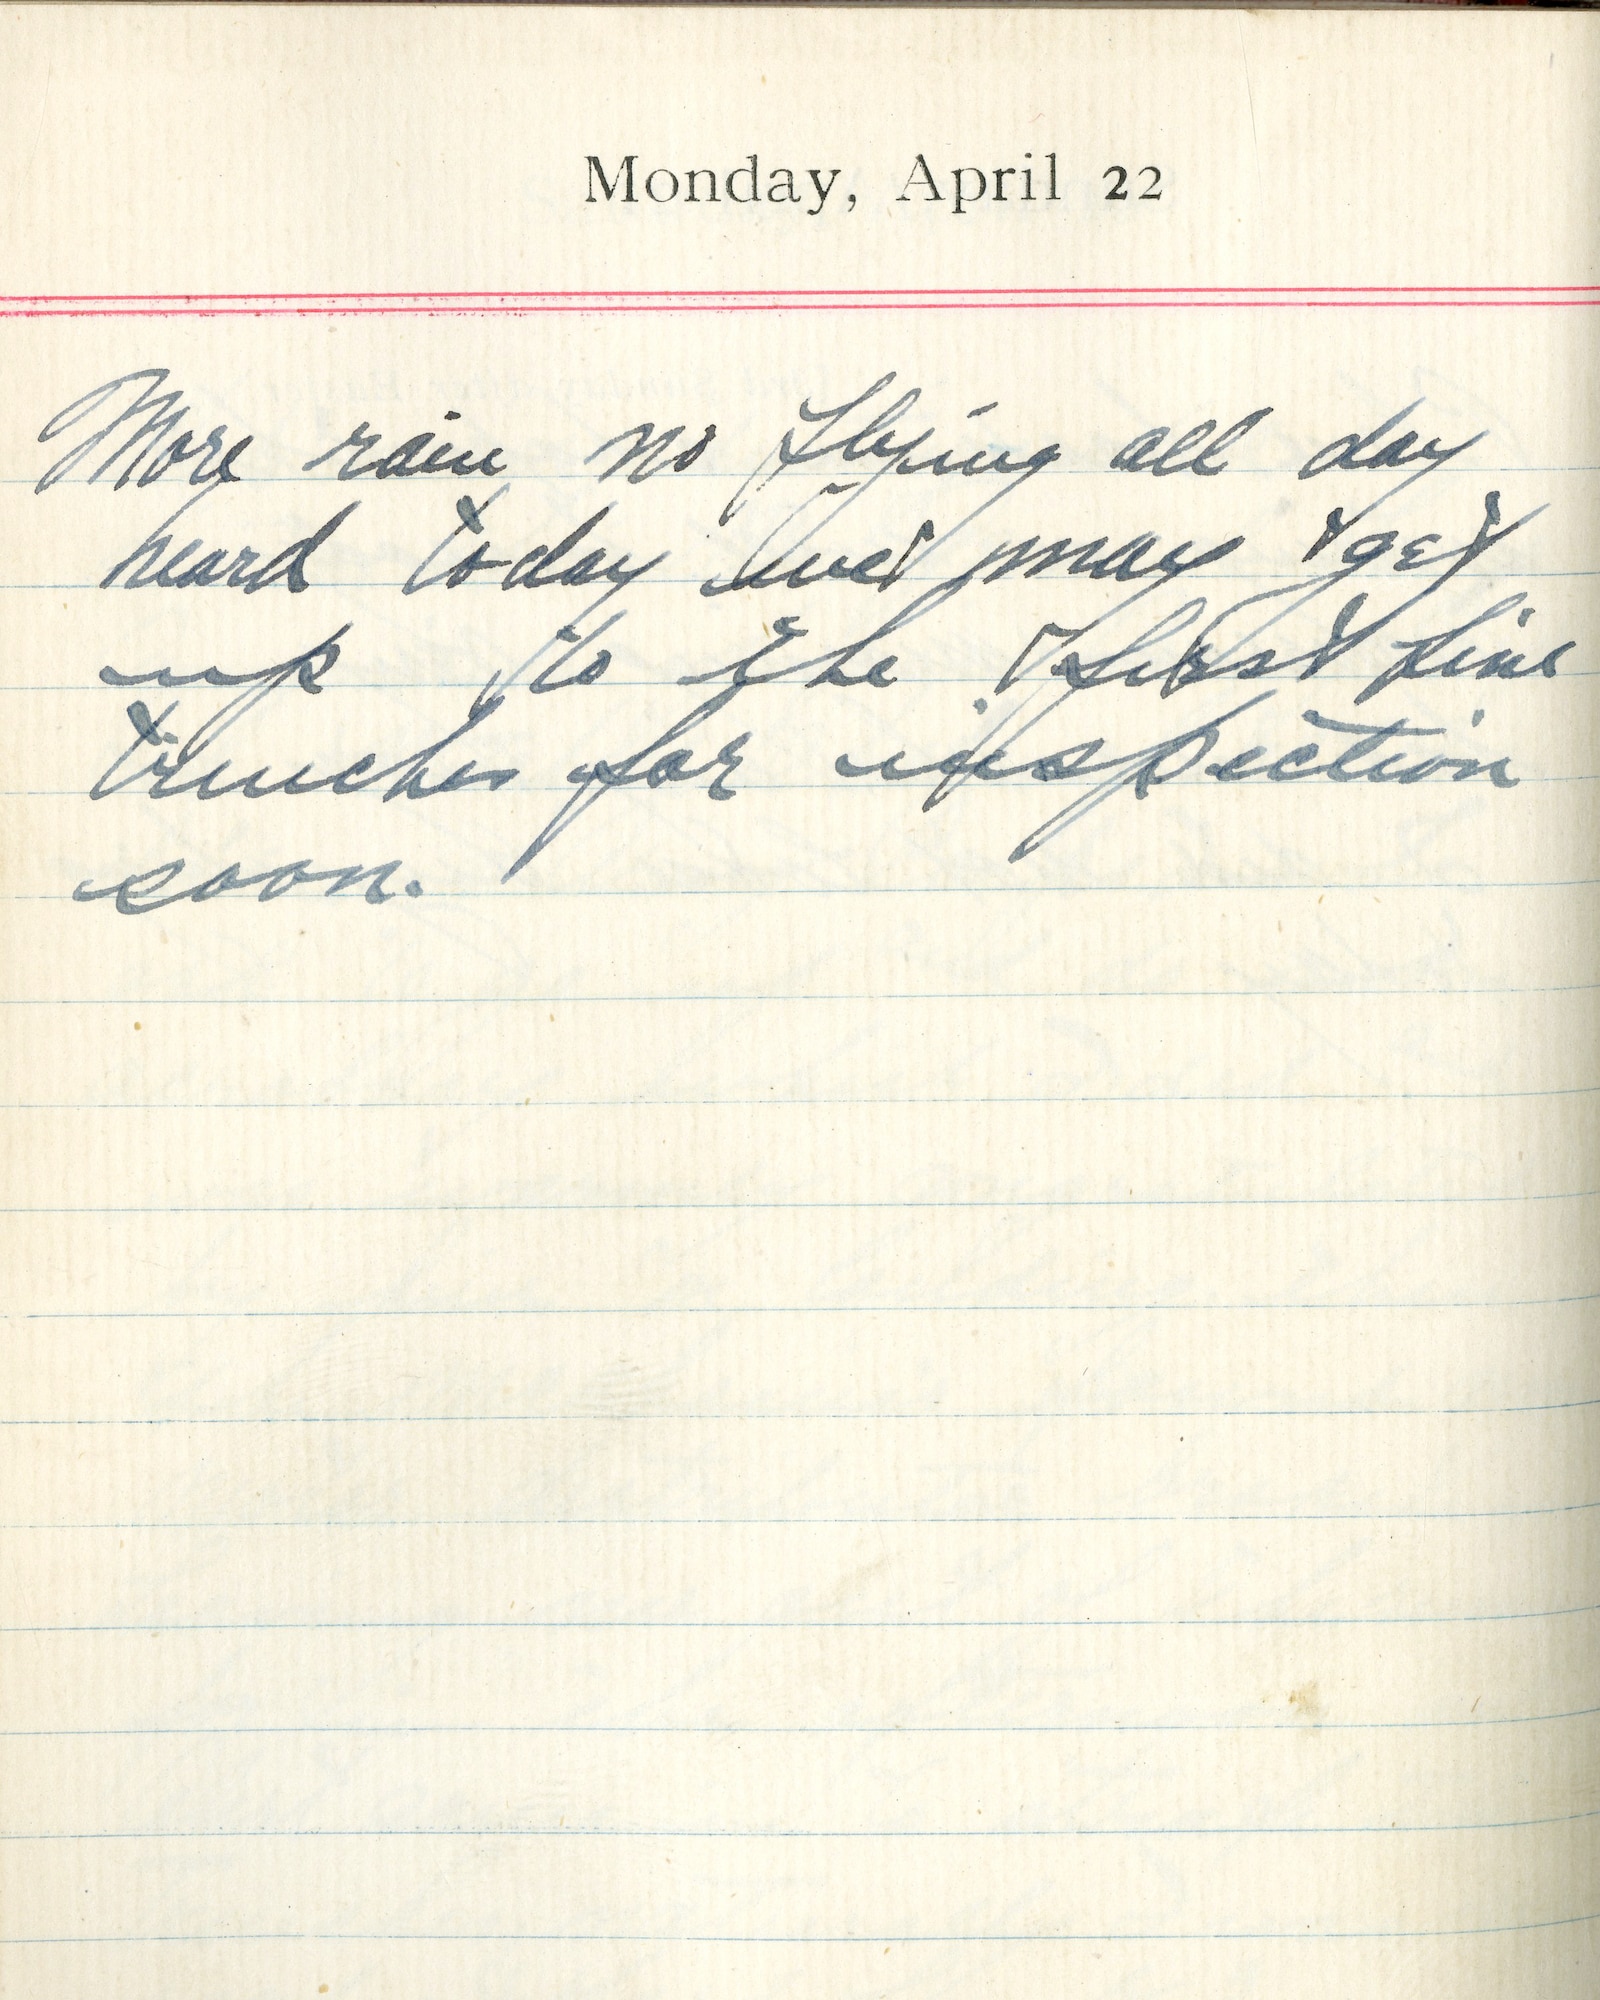 Capt. Edward V. Rickenbacker's 1918 wartime diary entry. (04/22/1918). More rain.  No flying all day.  Heard today we may get up to the first line trenches for inspection soon.